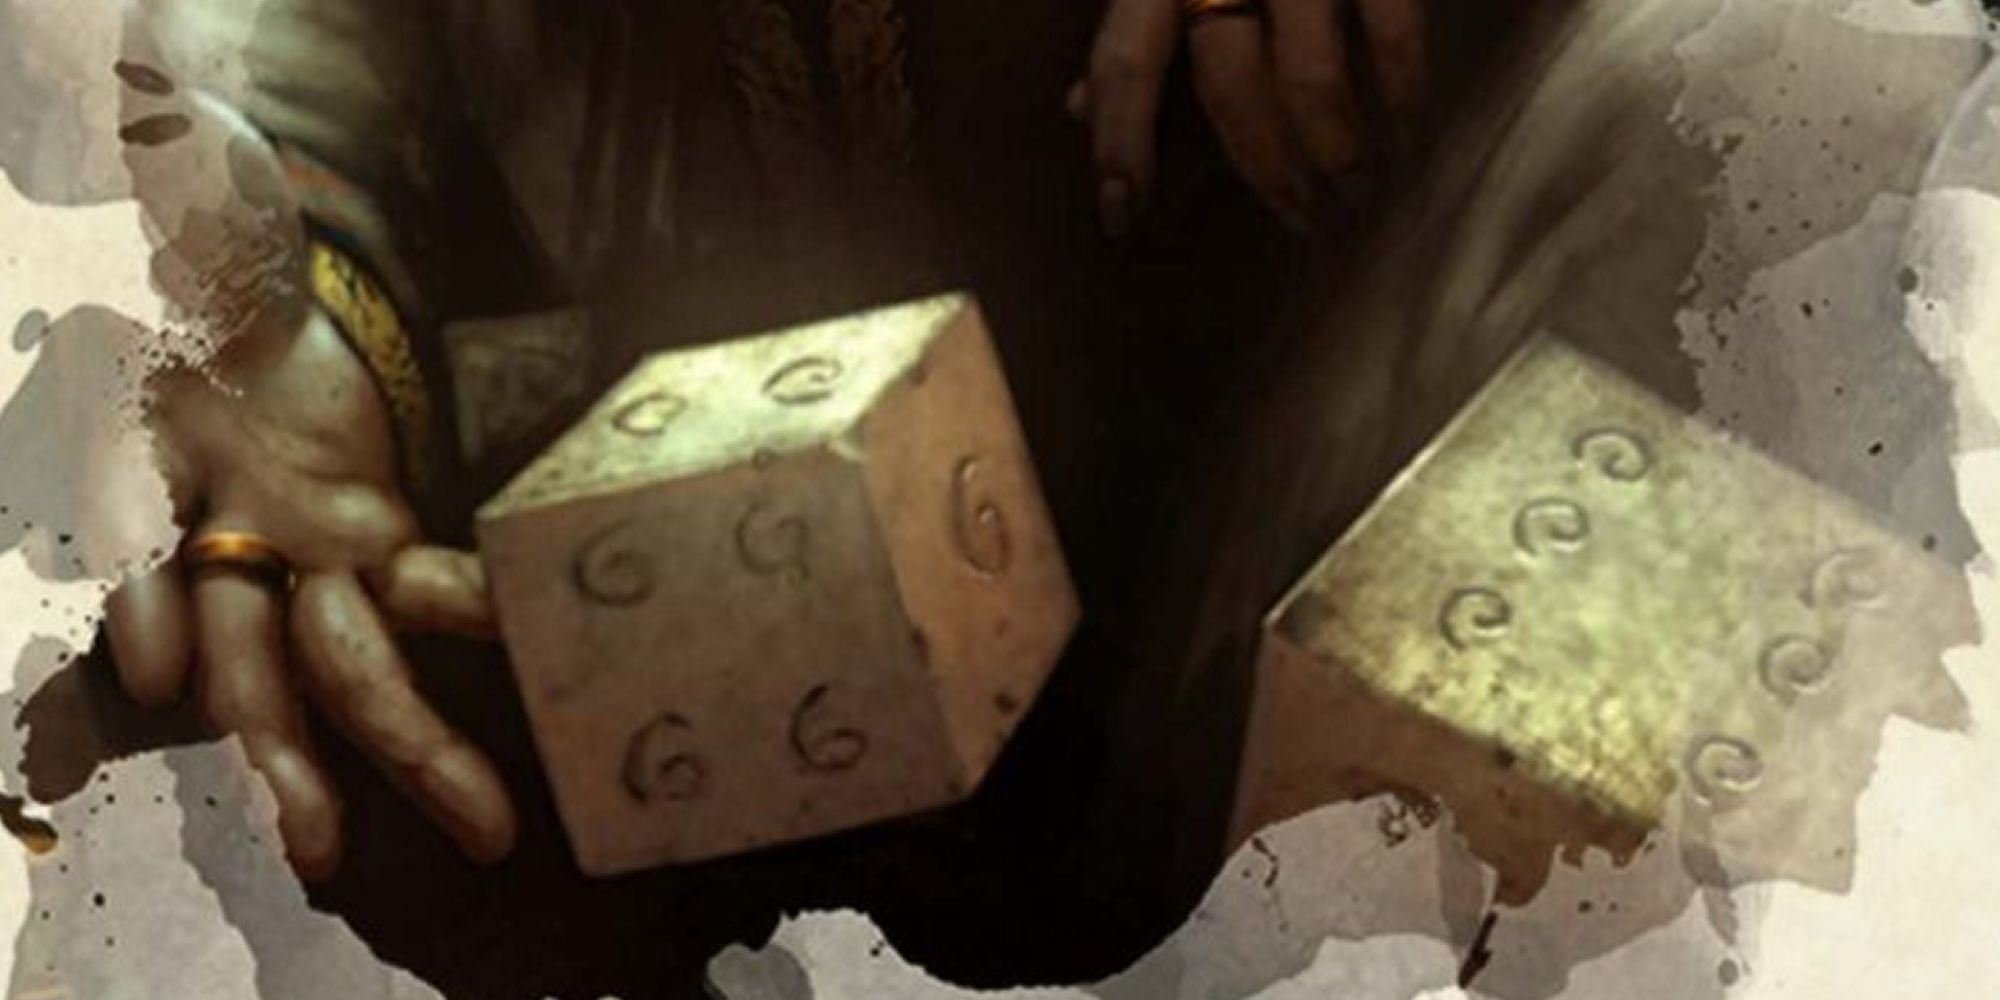 D&D Homebrew Rolling Dice With Runes On Them